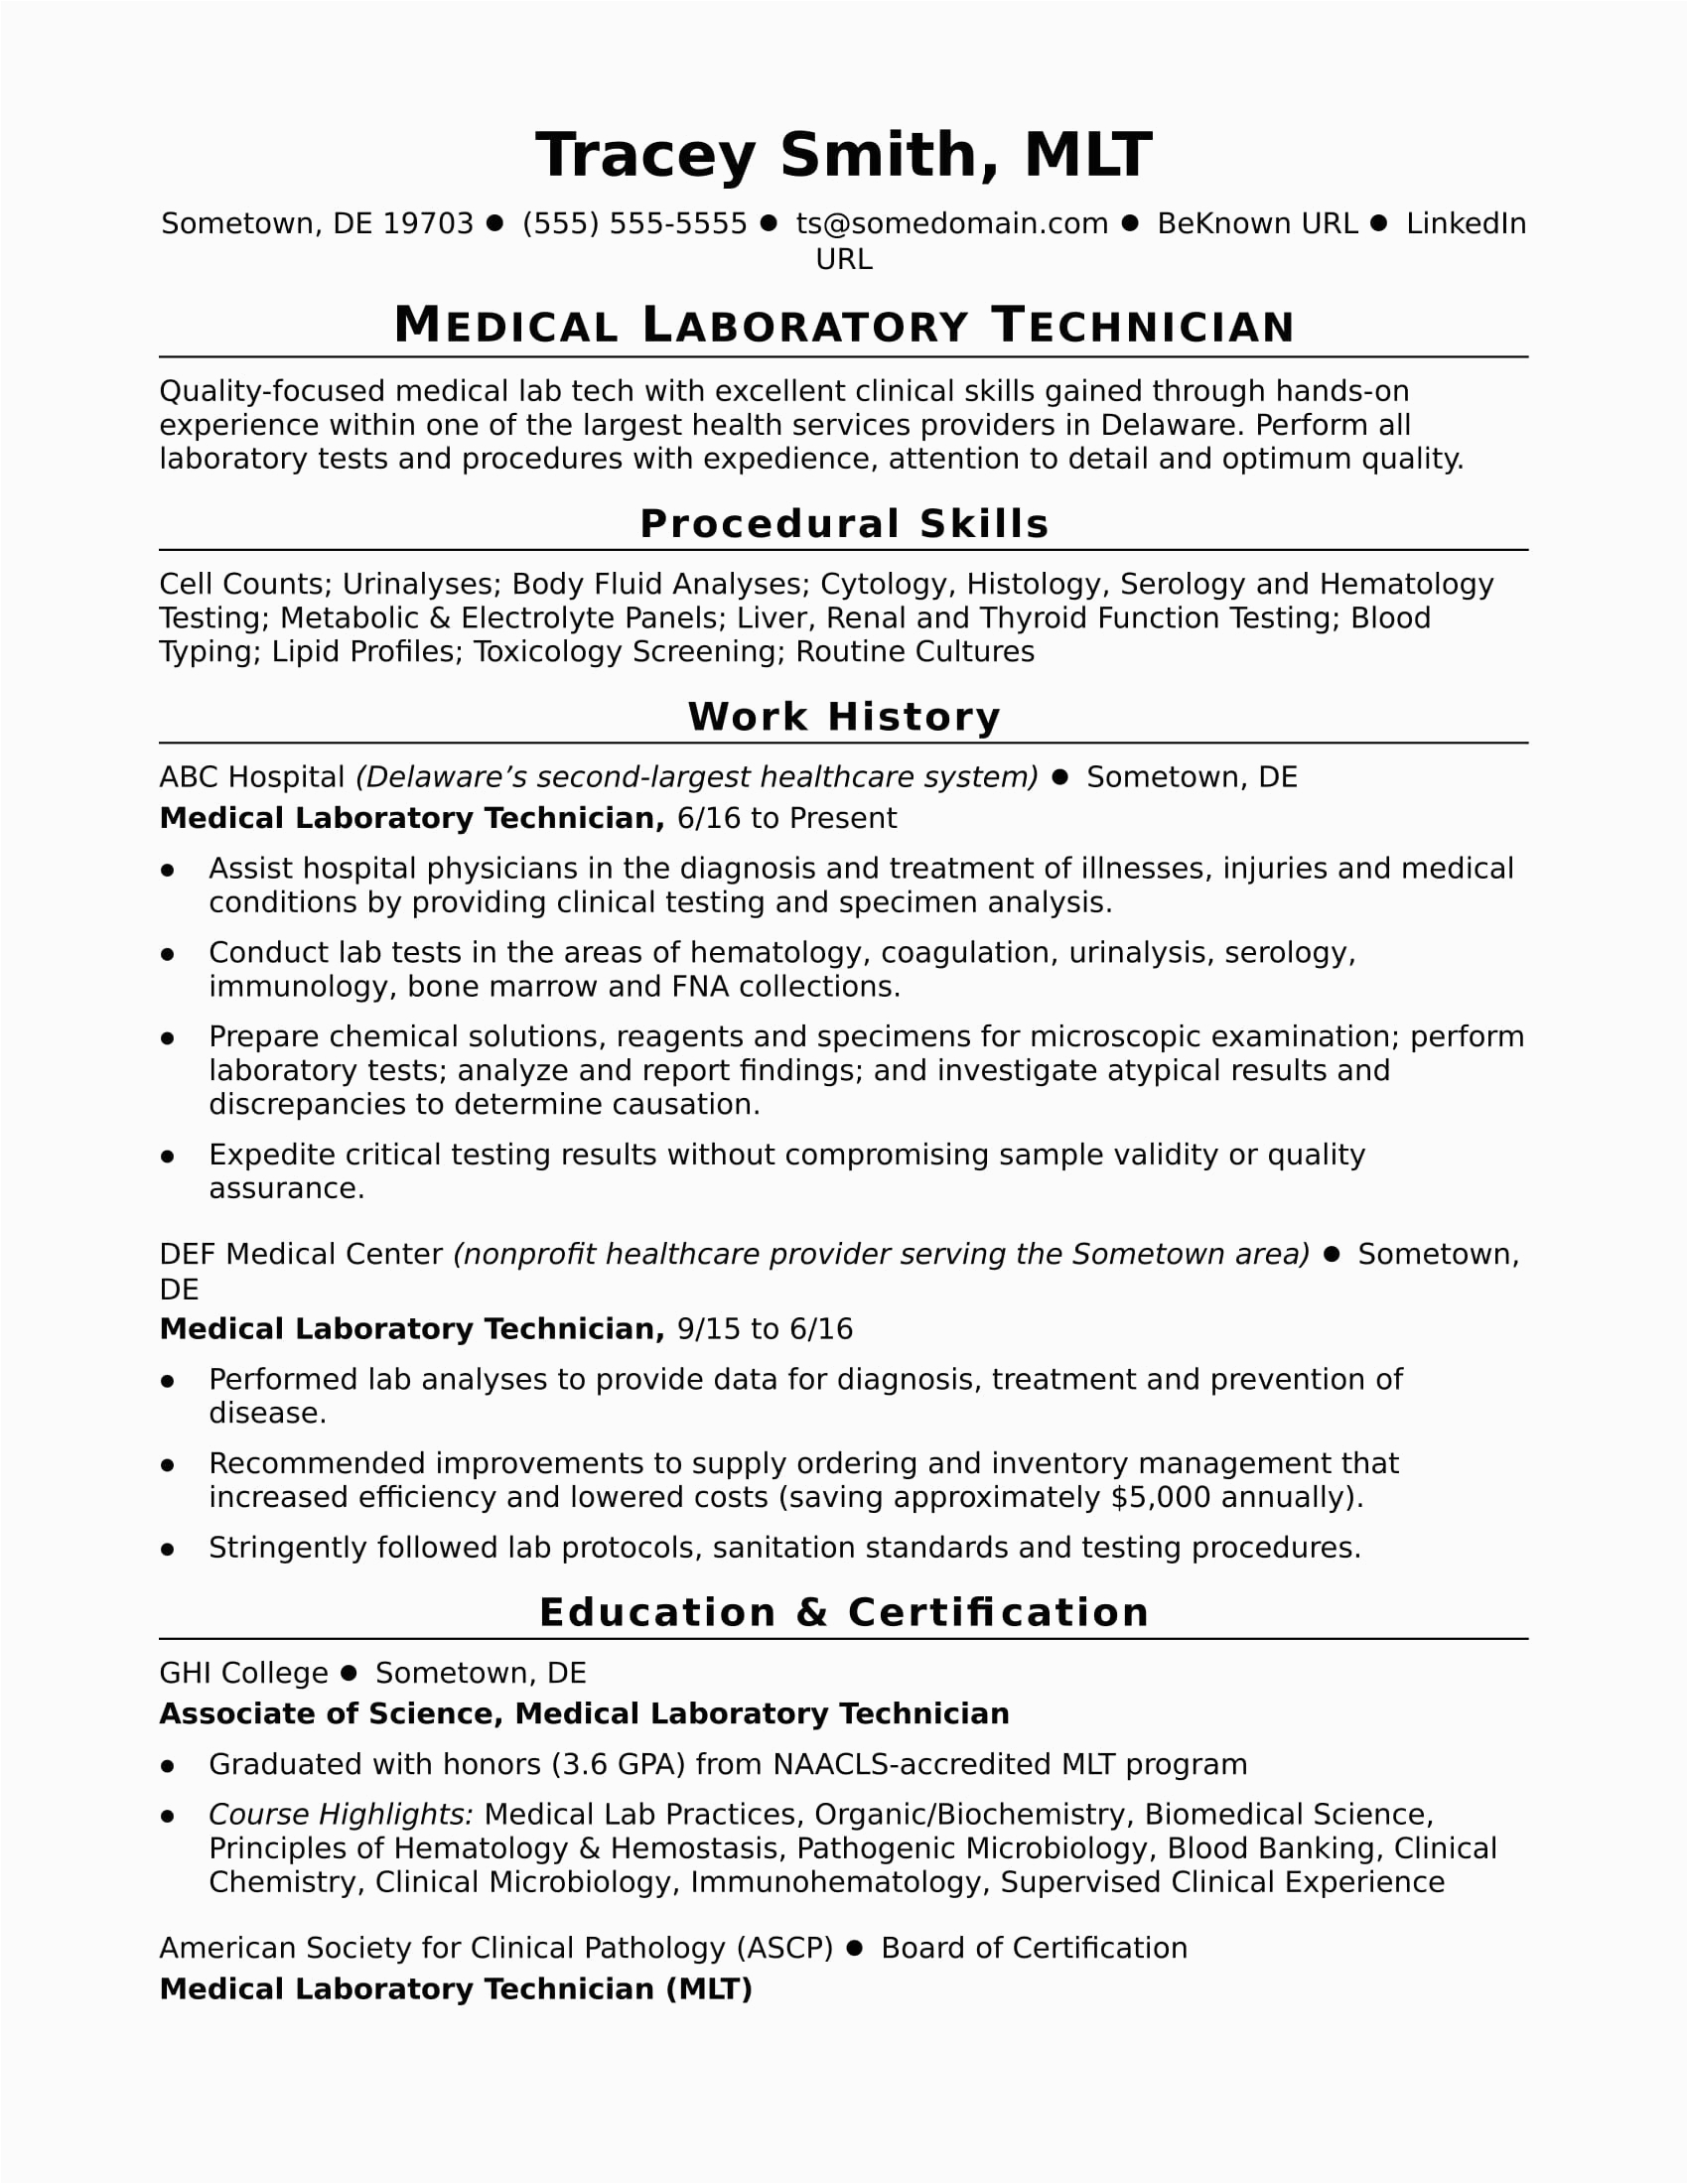 Sample Resume for Entry Level Lab Technician Sample Lab Technician Resume